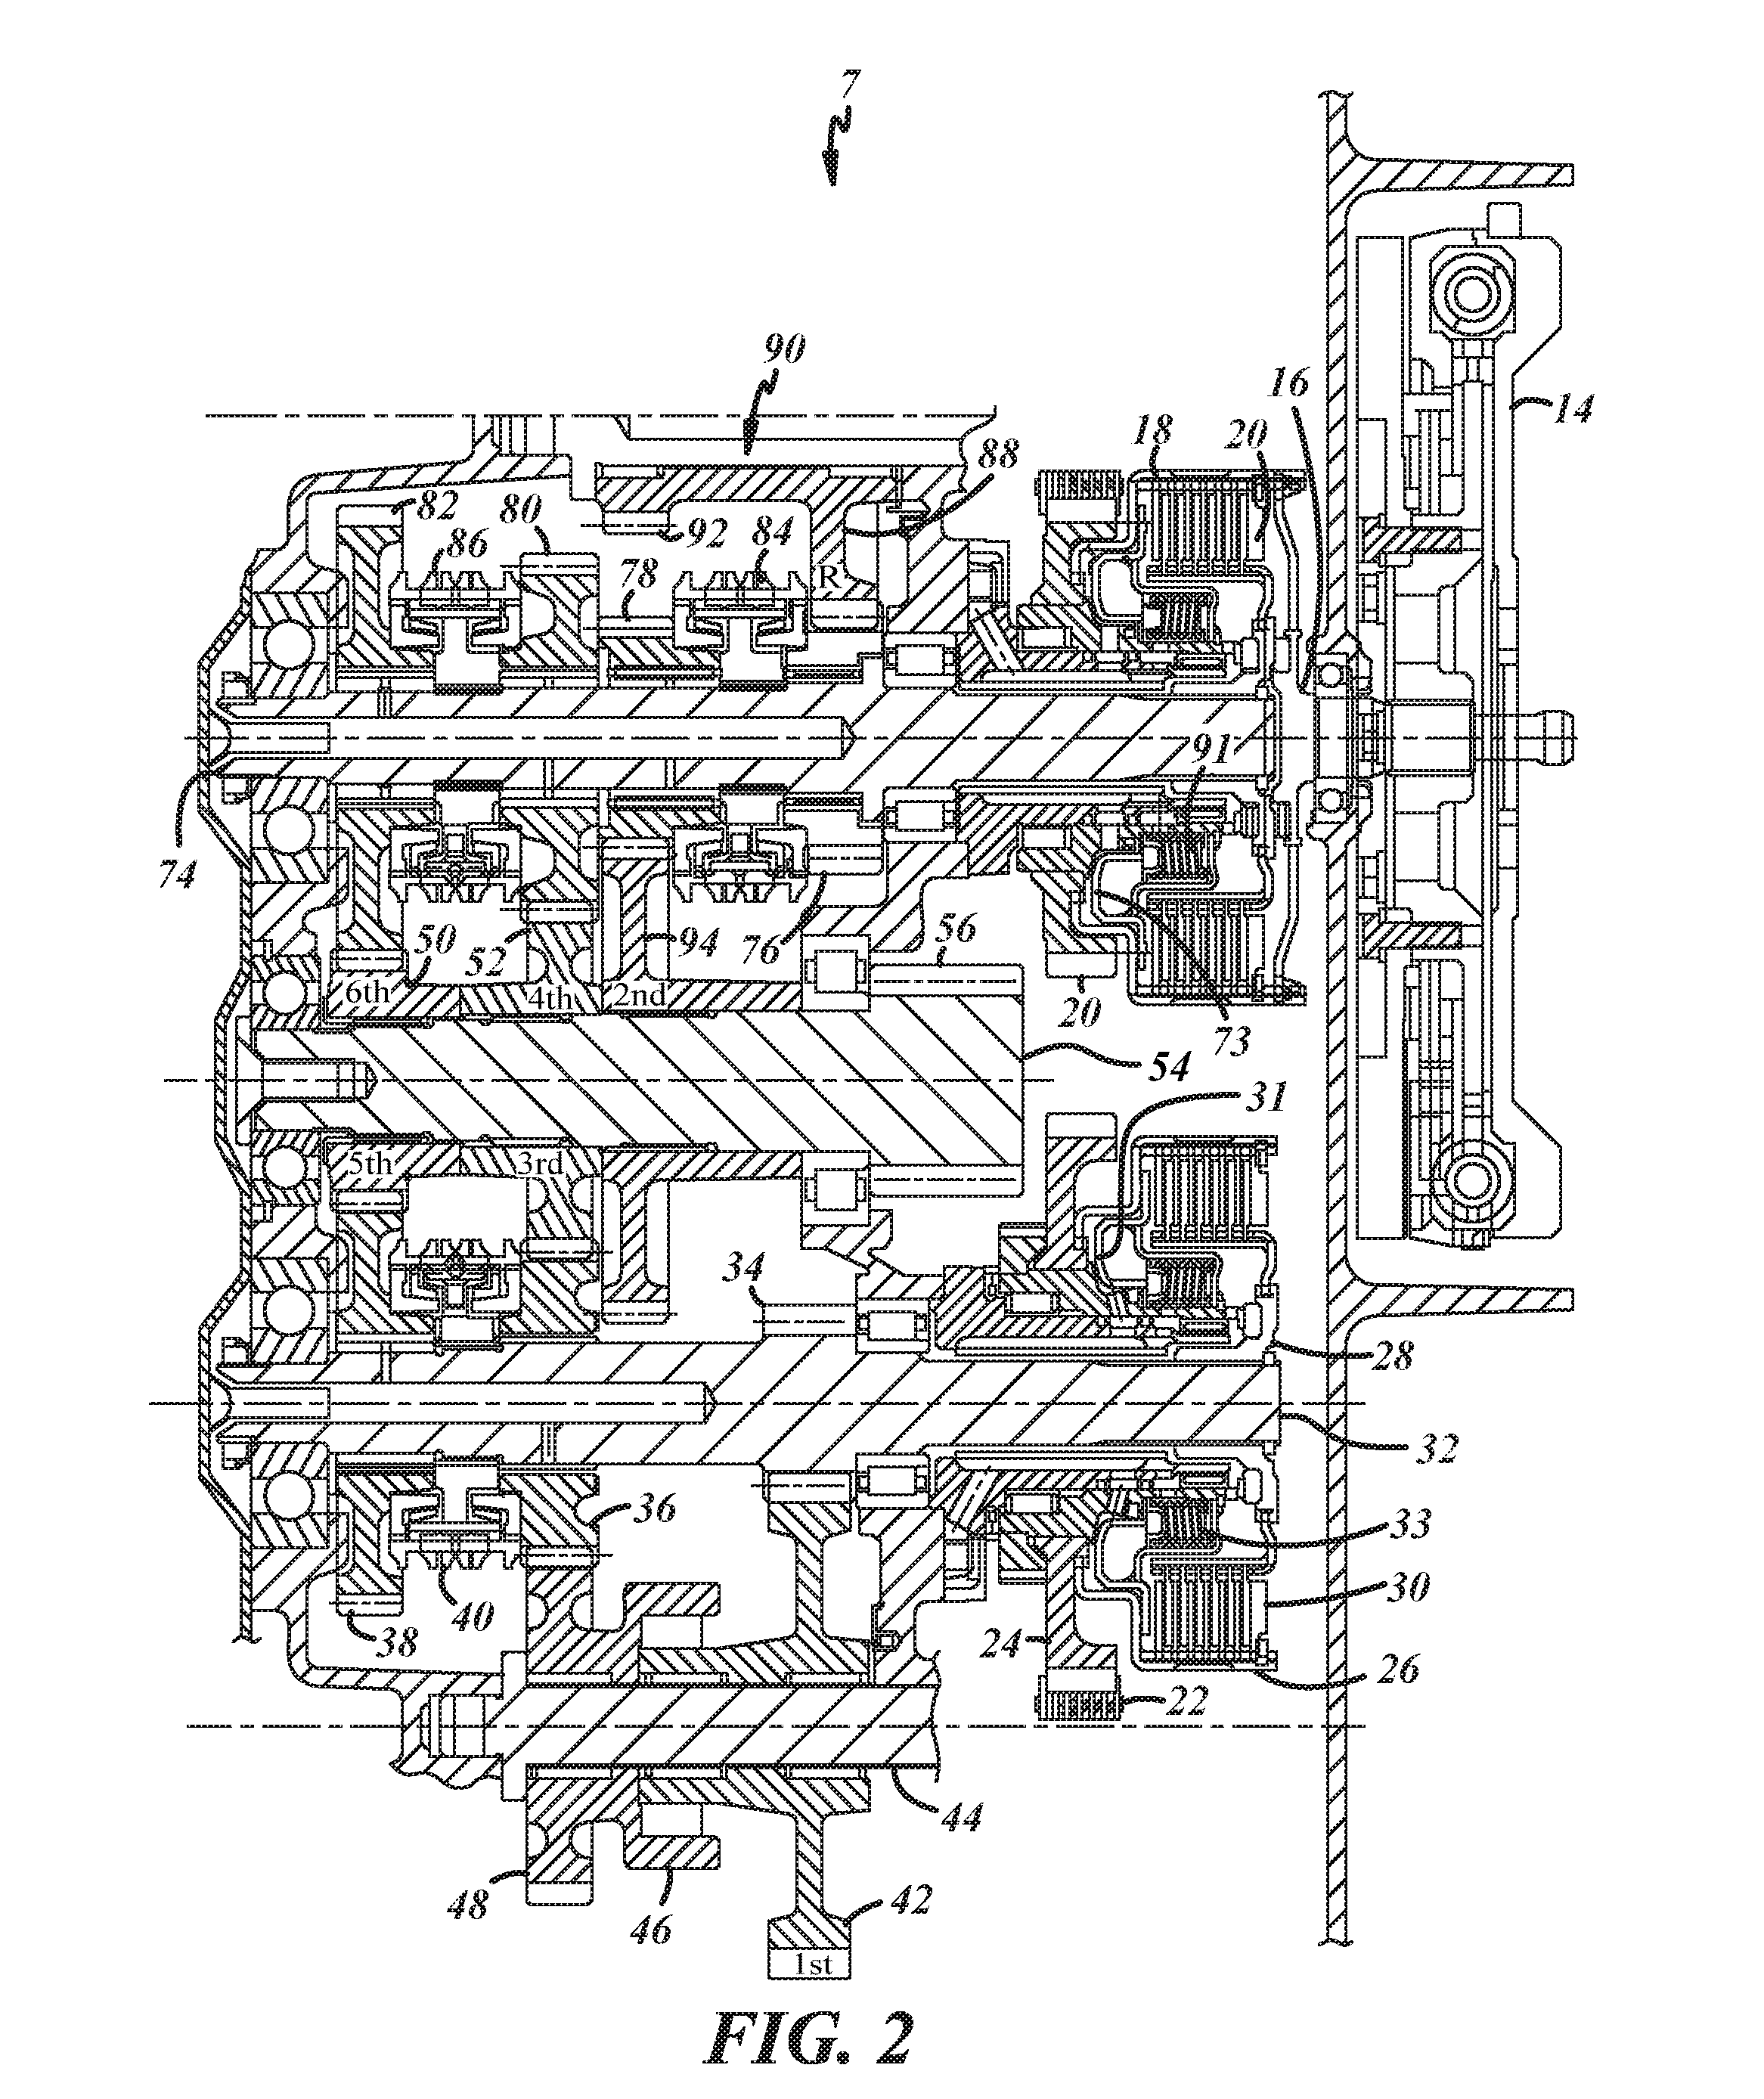 Power transfer unit (PTU) assembly with hydraulically actuated disconnect rear output shaft